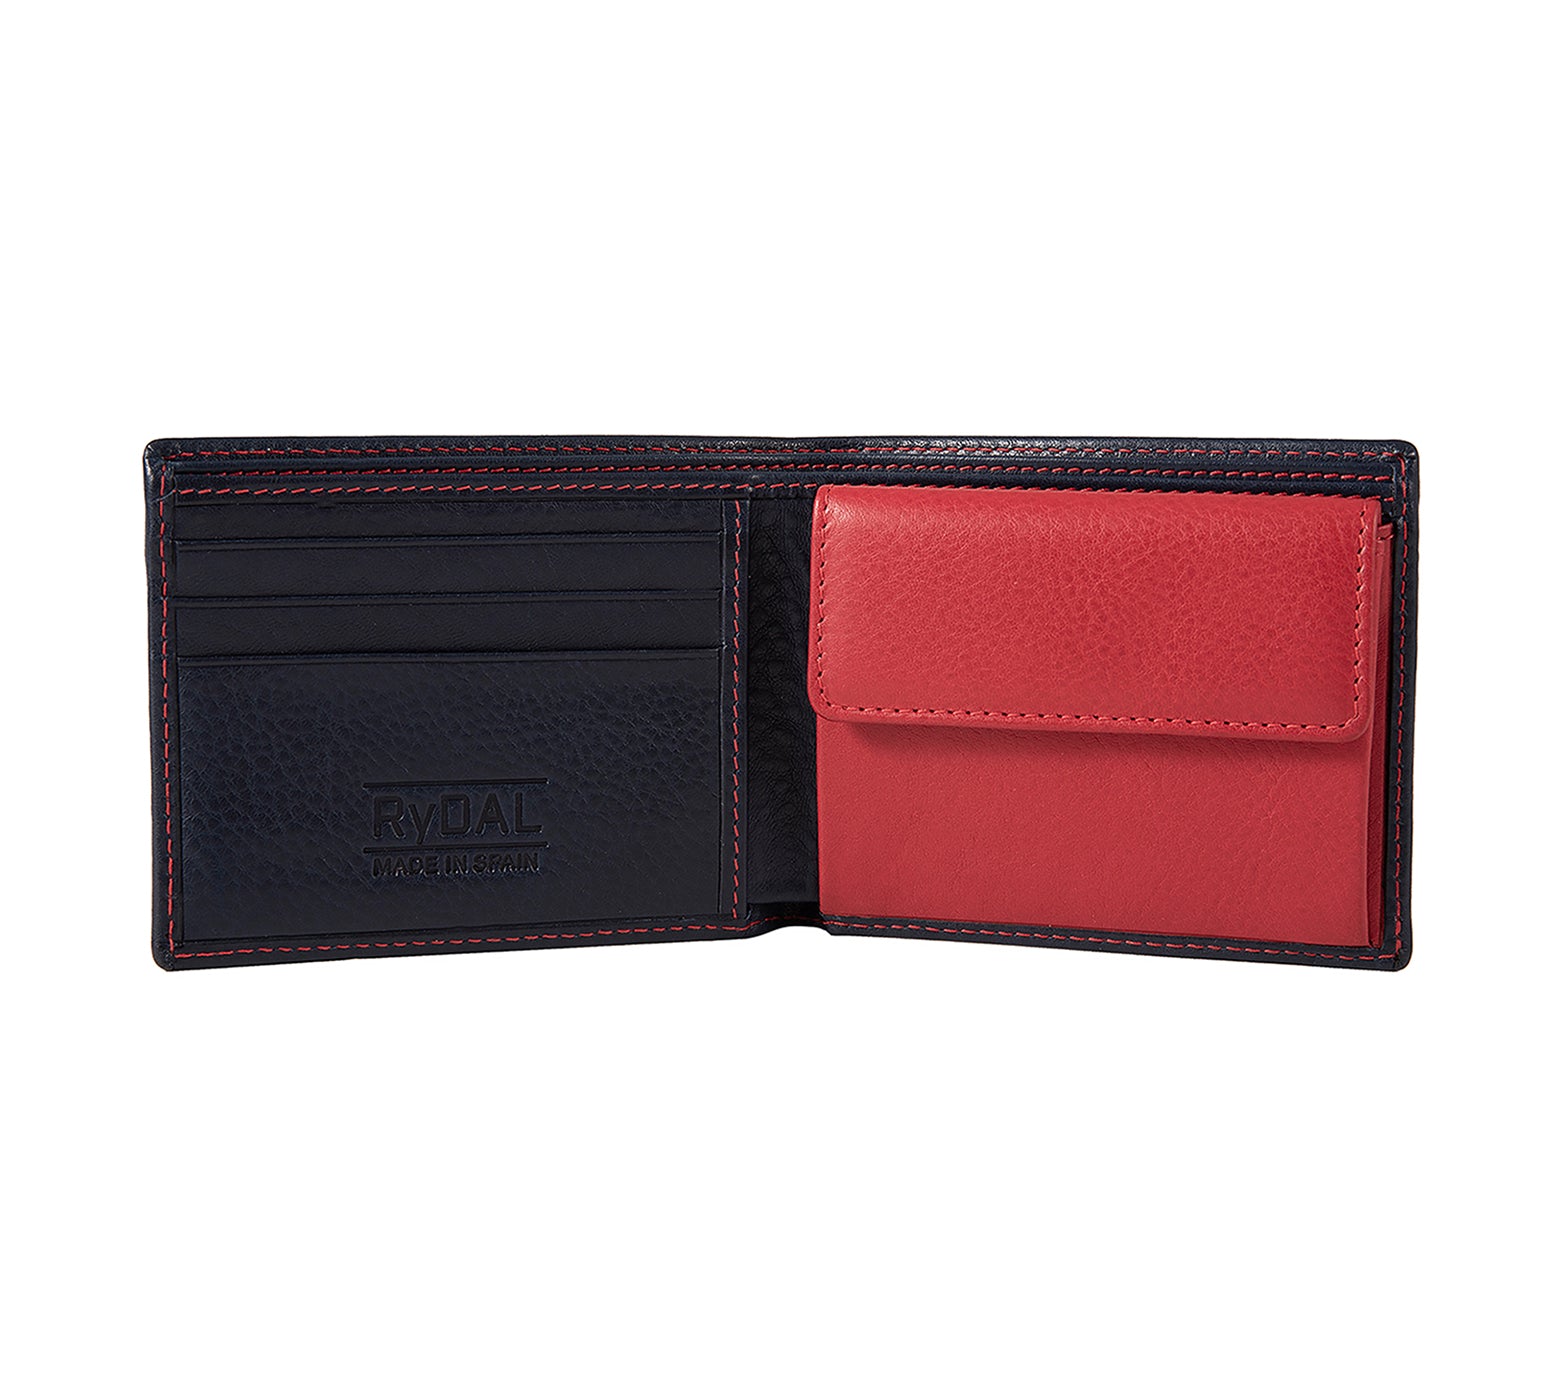 Mens Leather Wallet with Coin Pocket from Rydal in 'Royal Blue/Red' showing interior.